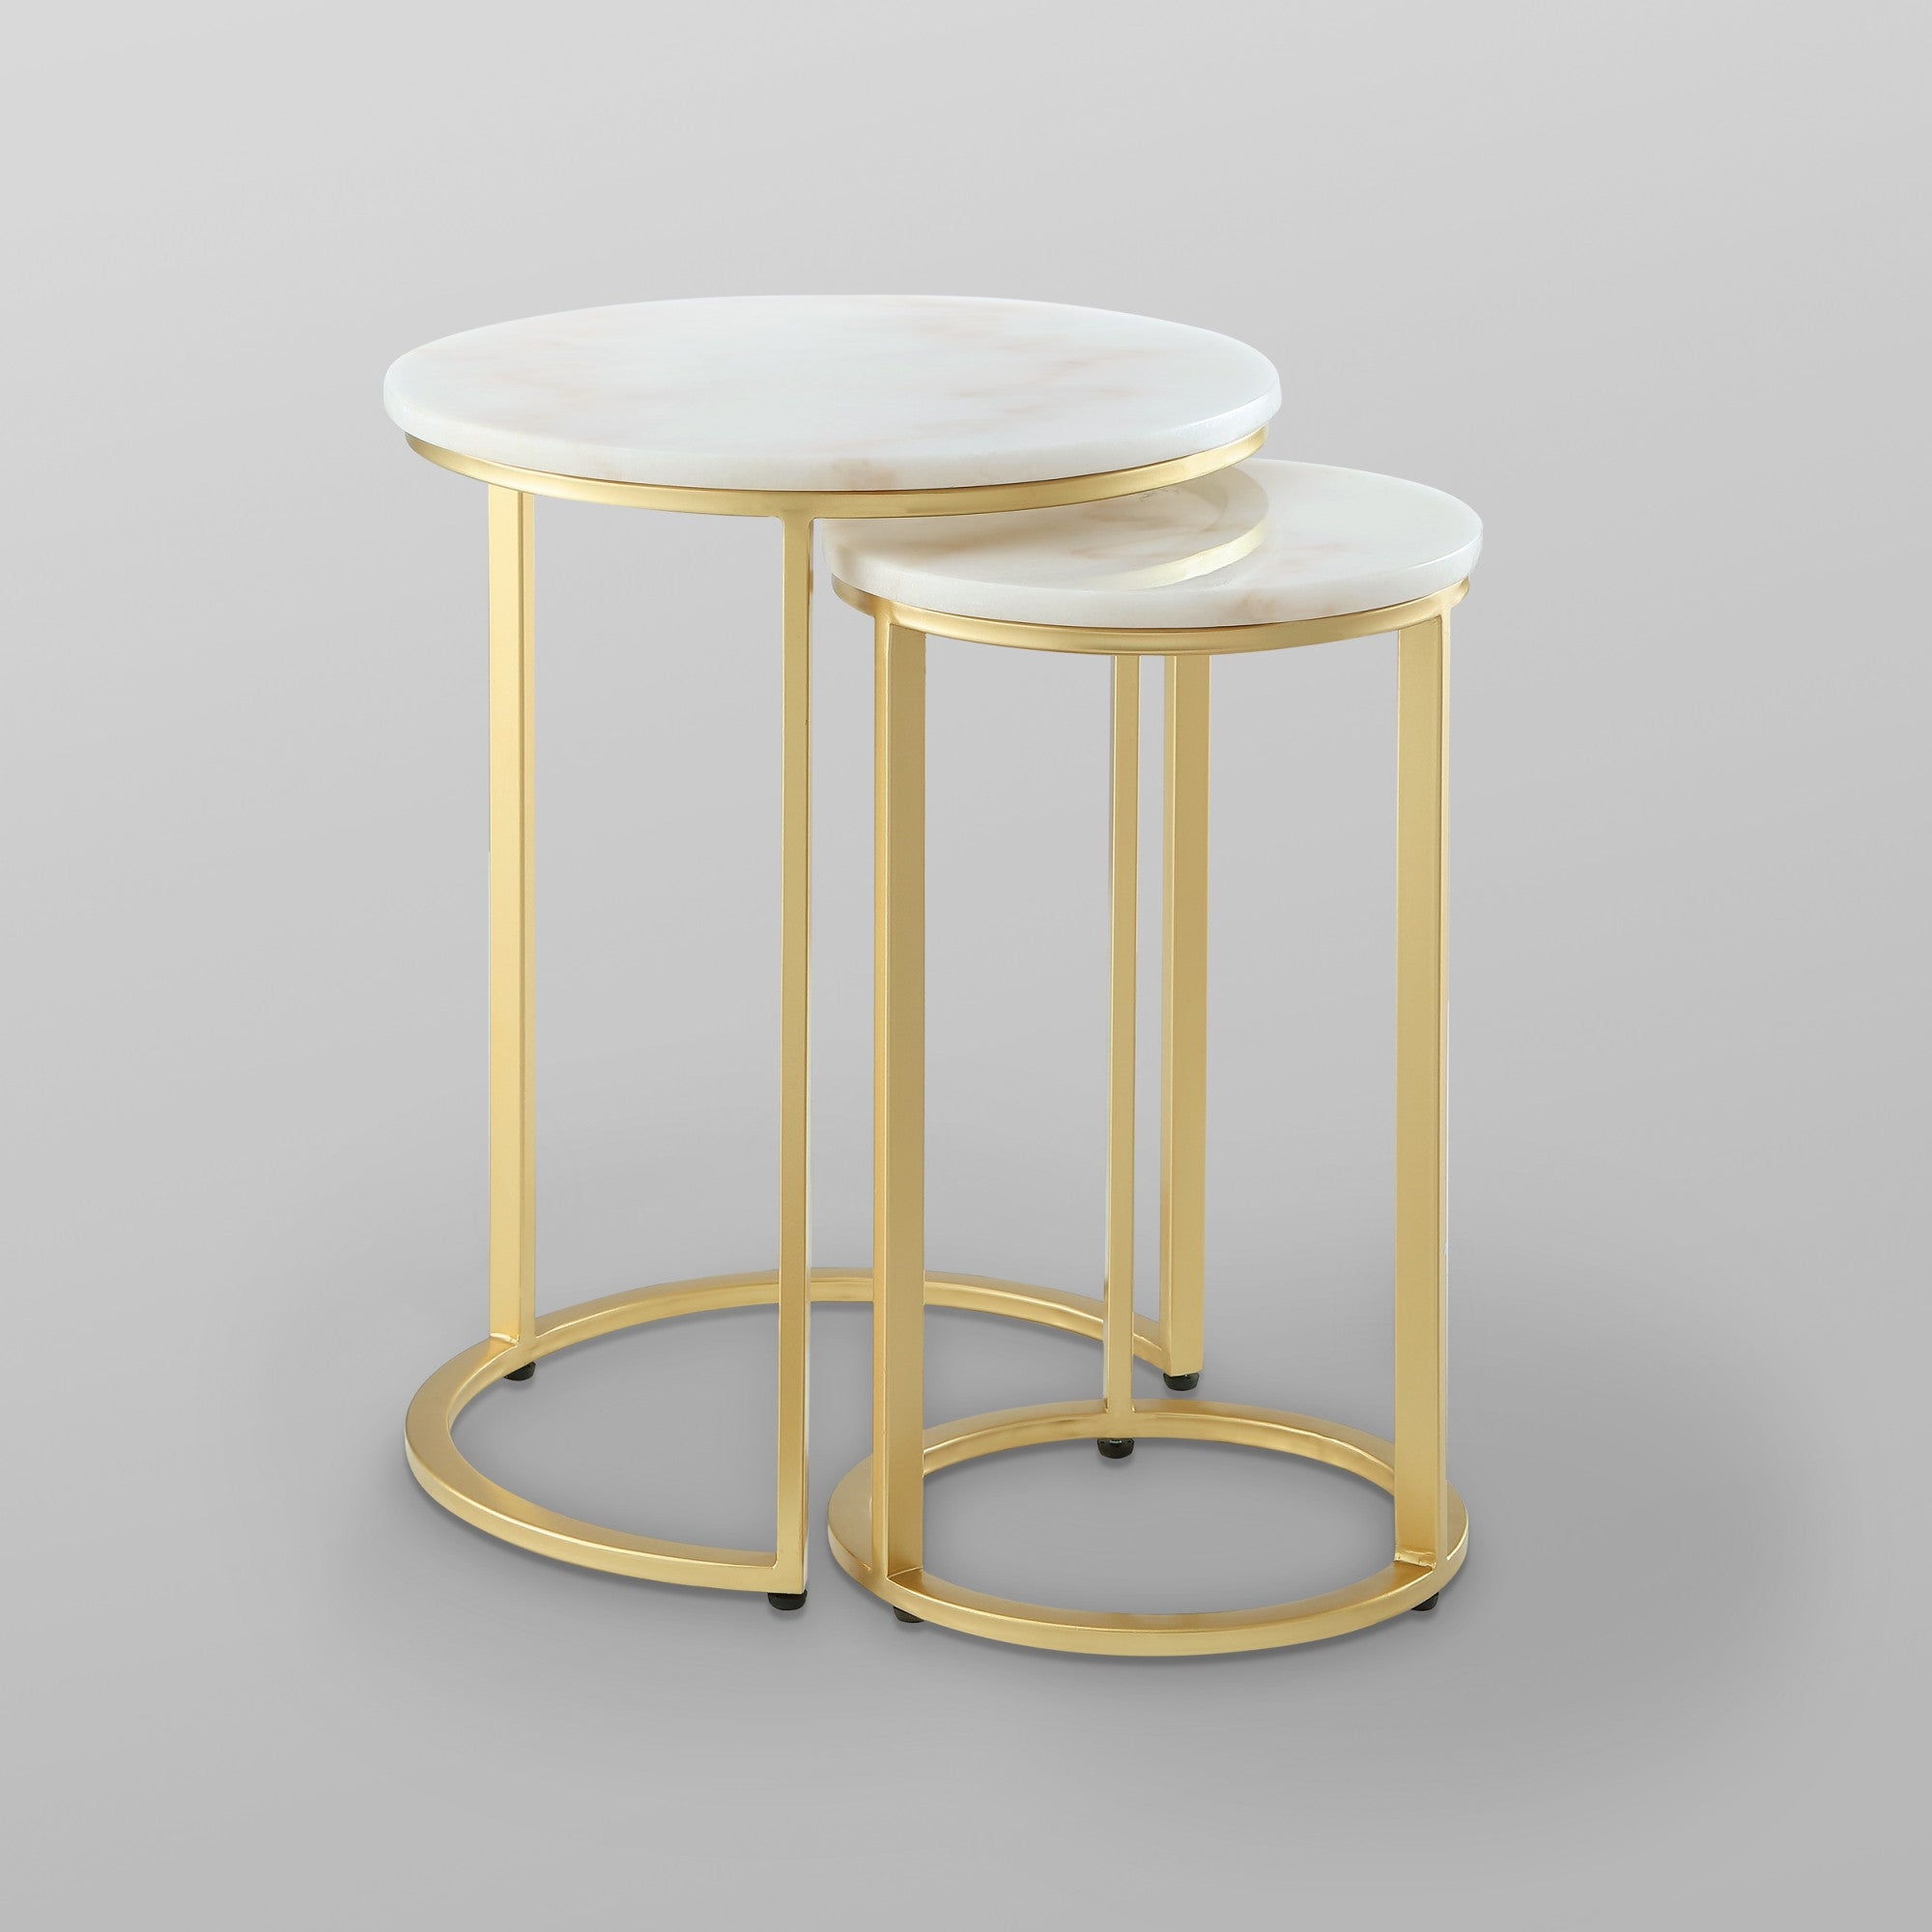 Set of Two 22" Gold and White Marble Round Nested Tables